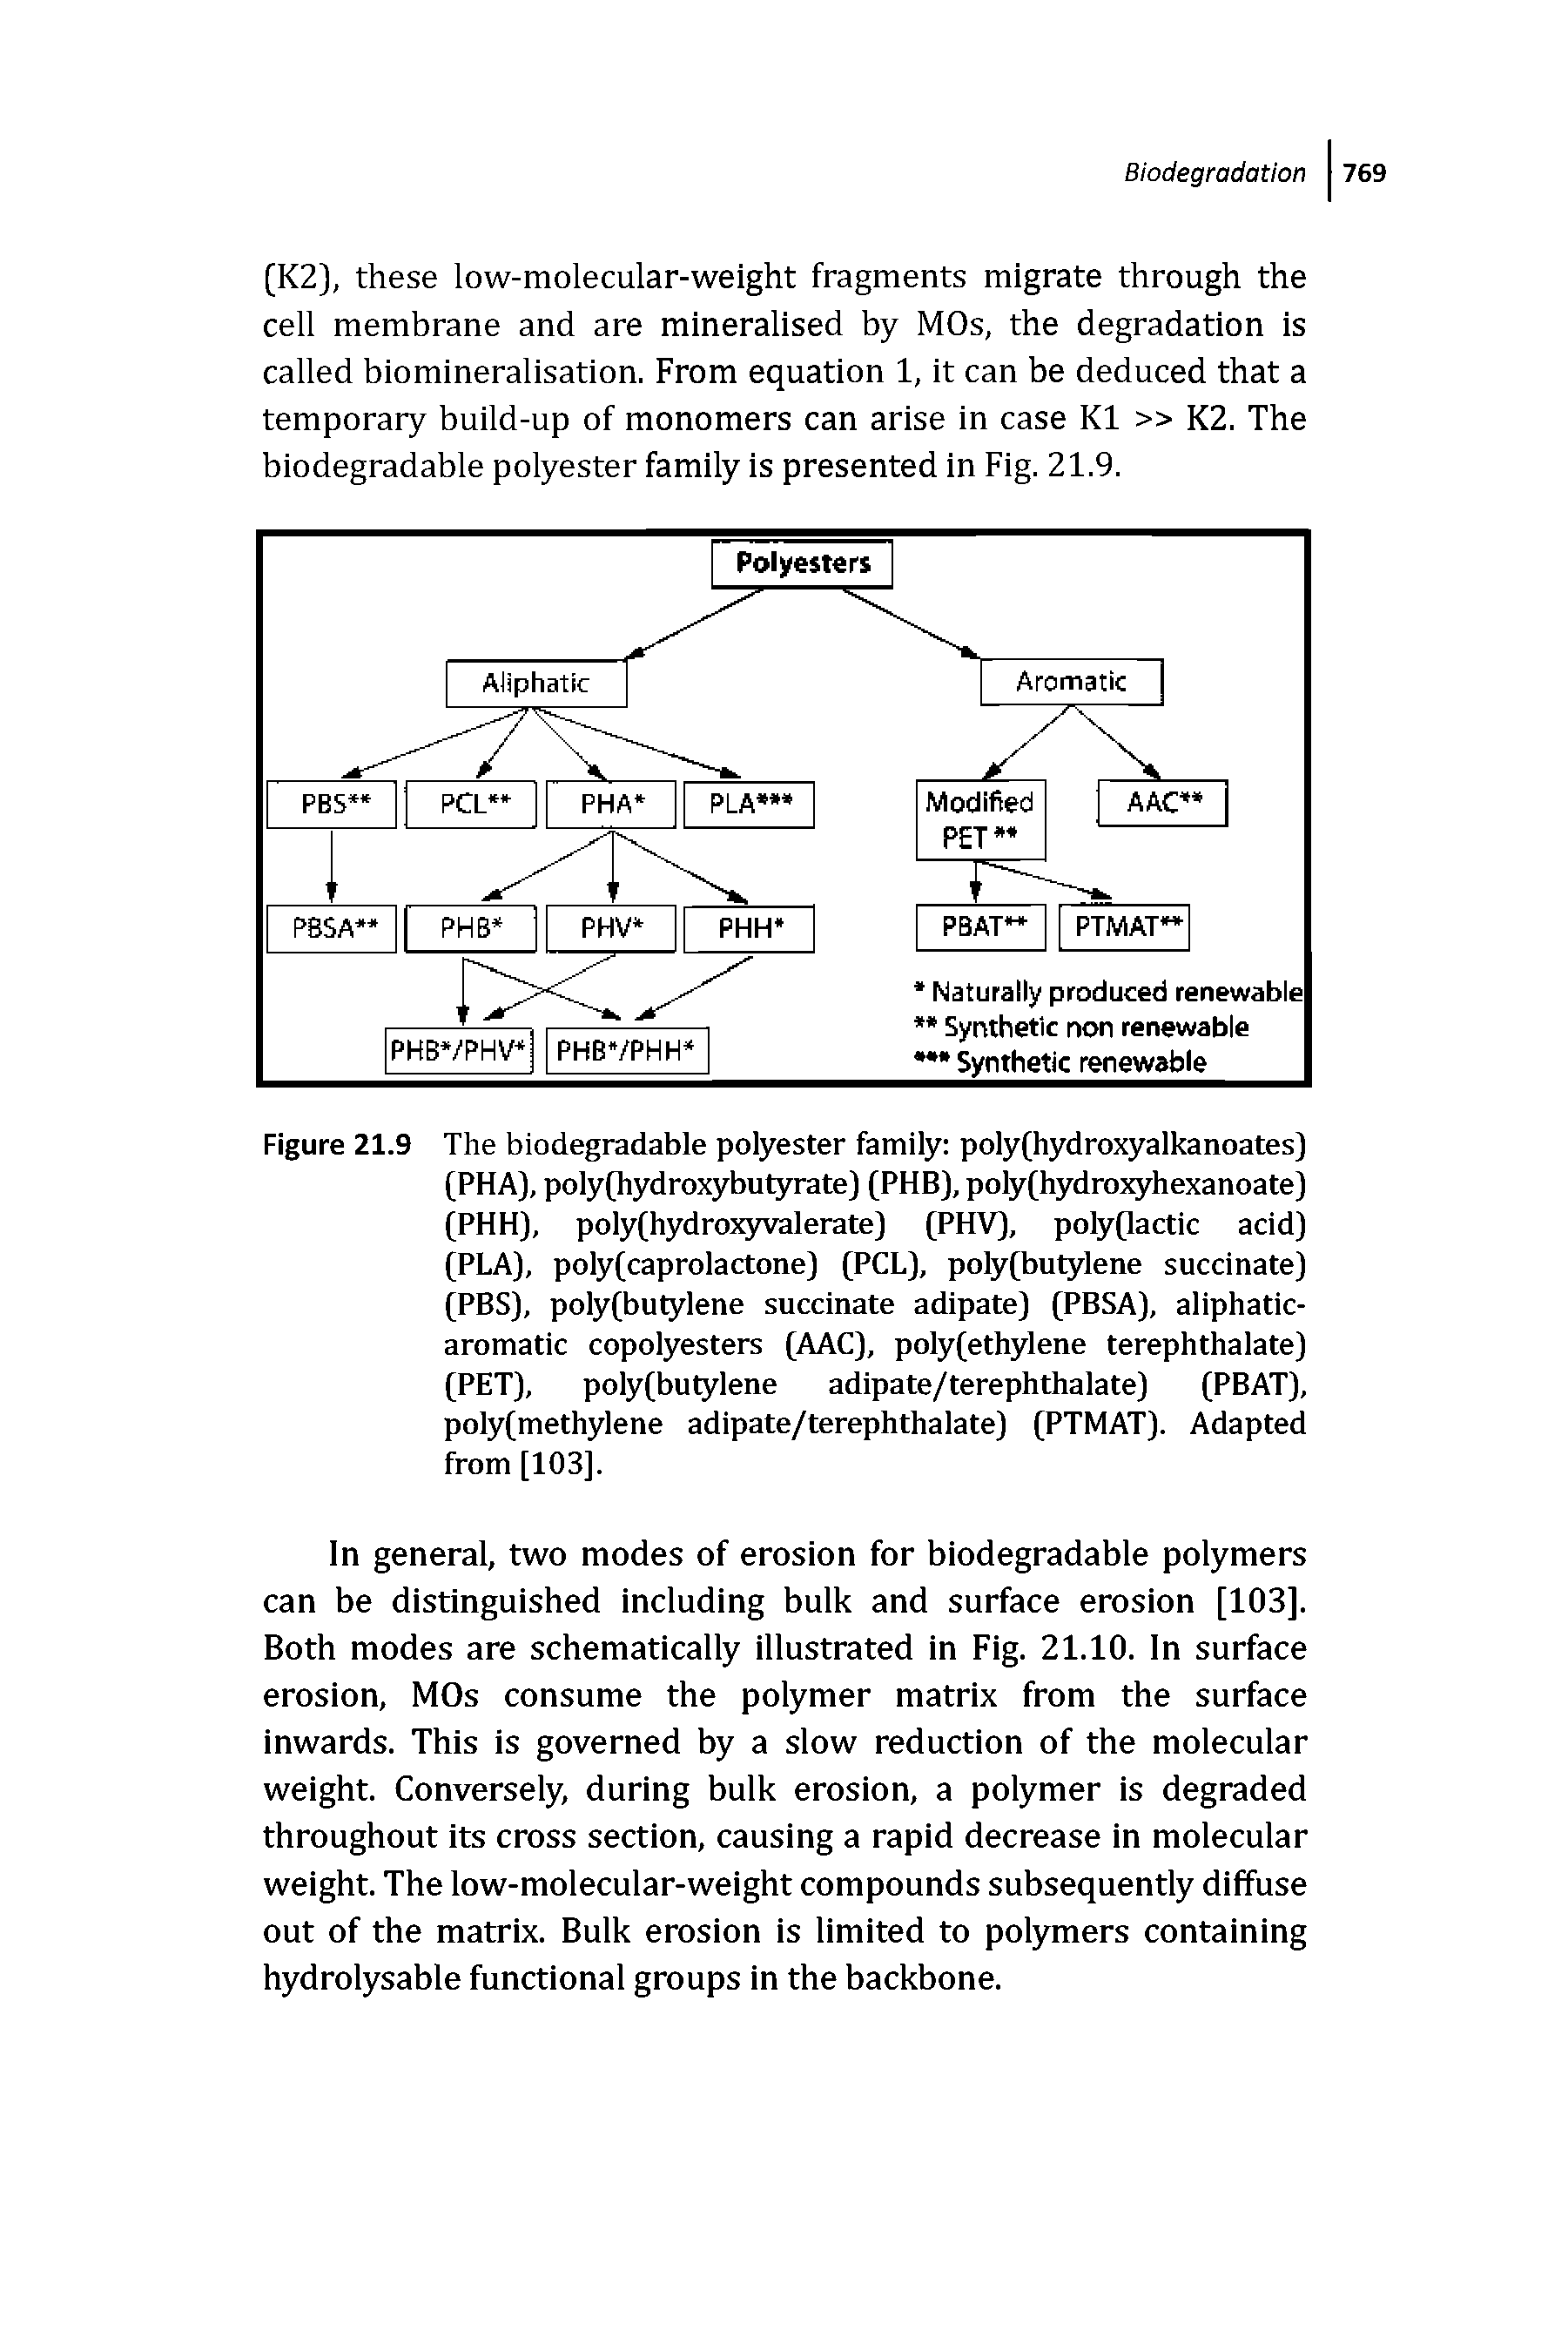 Figure 21.9 The biodegradable polyester family poly(hydroxyalkanoates) (PHA), poly(hydroxybulyrate) (PHB), poly(hydro3qdiexanoate) (PHH), poly(hydrox3rvalerate] (PHV), polyflactic acid) (PLA), poly(caprolactone) fPCL), poly(butylene succinate) (PBS), poly(butylene succinate adipate) (PBSA), aliphatic-aromatic copolyesters (AAC), poly(ethylene terephthalate) (PET), poly(butylene adipate/terephthalate) (PBAT), poly(methylene adipate/terephthalate) (PTMAT). Adapted from [103].